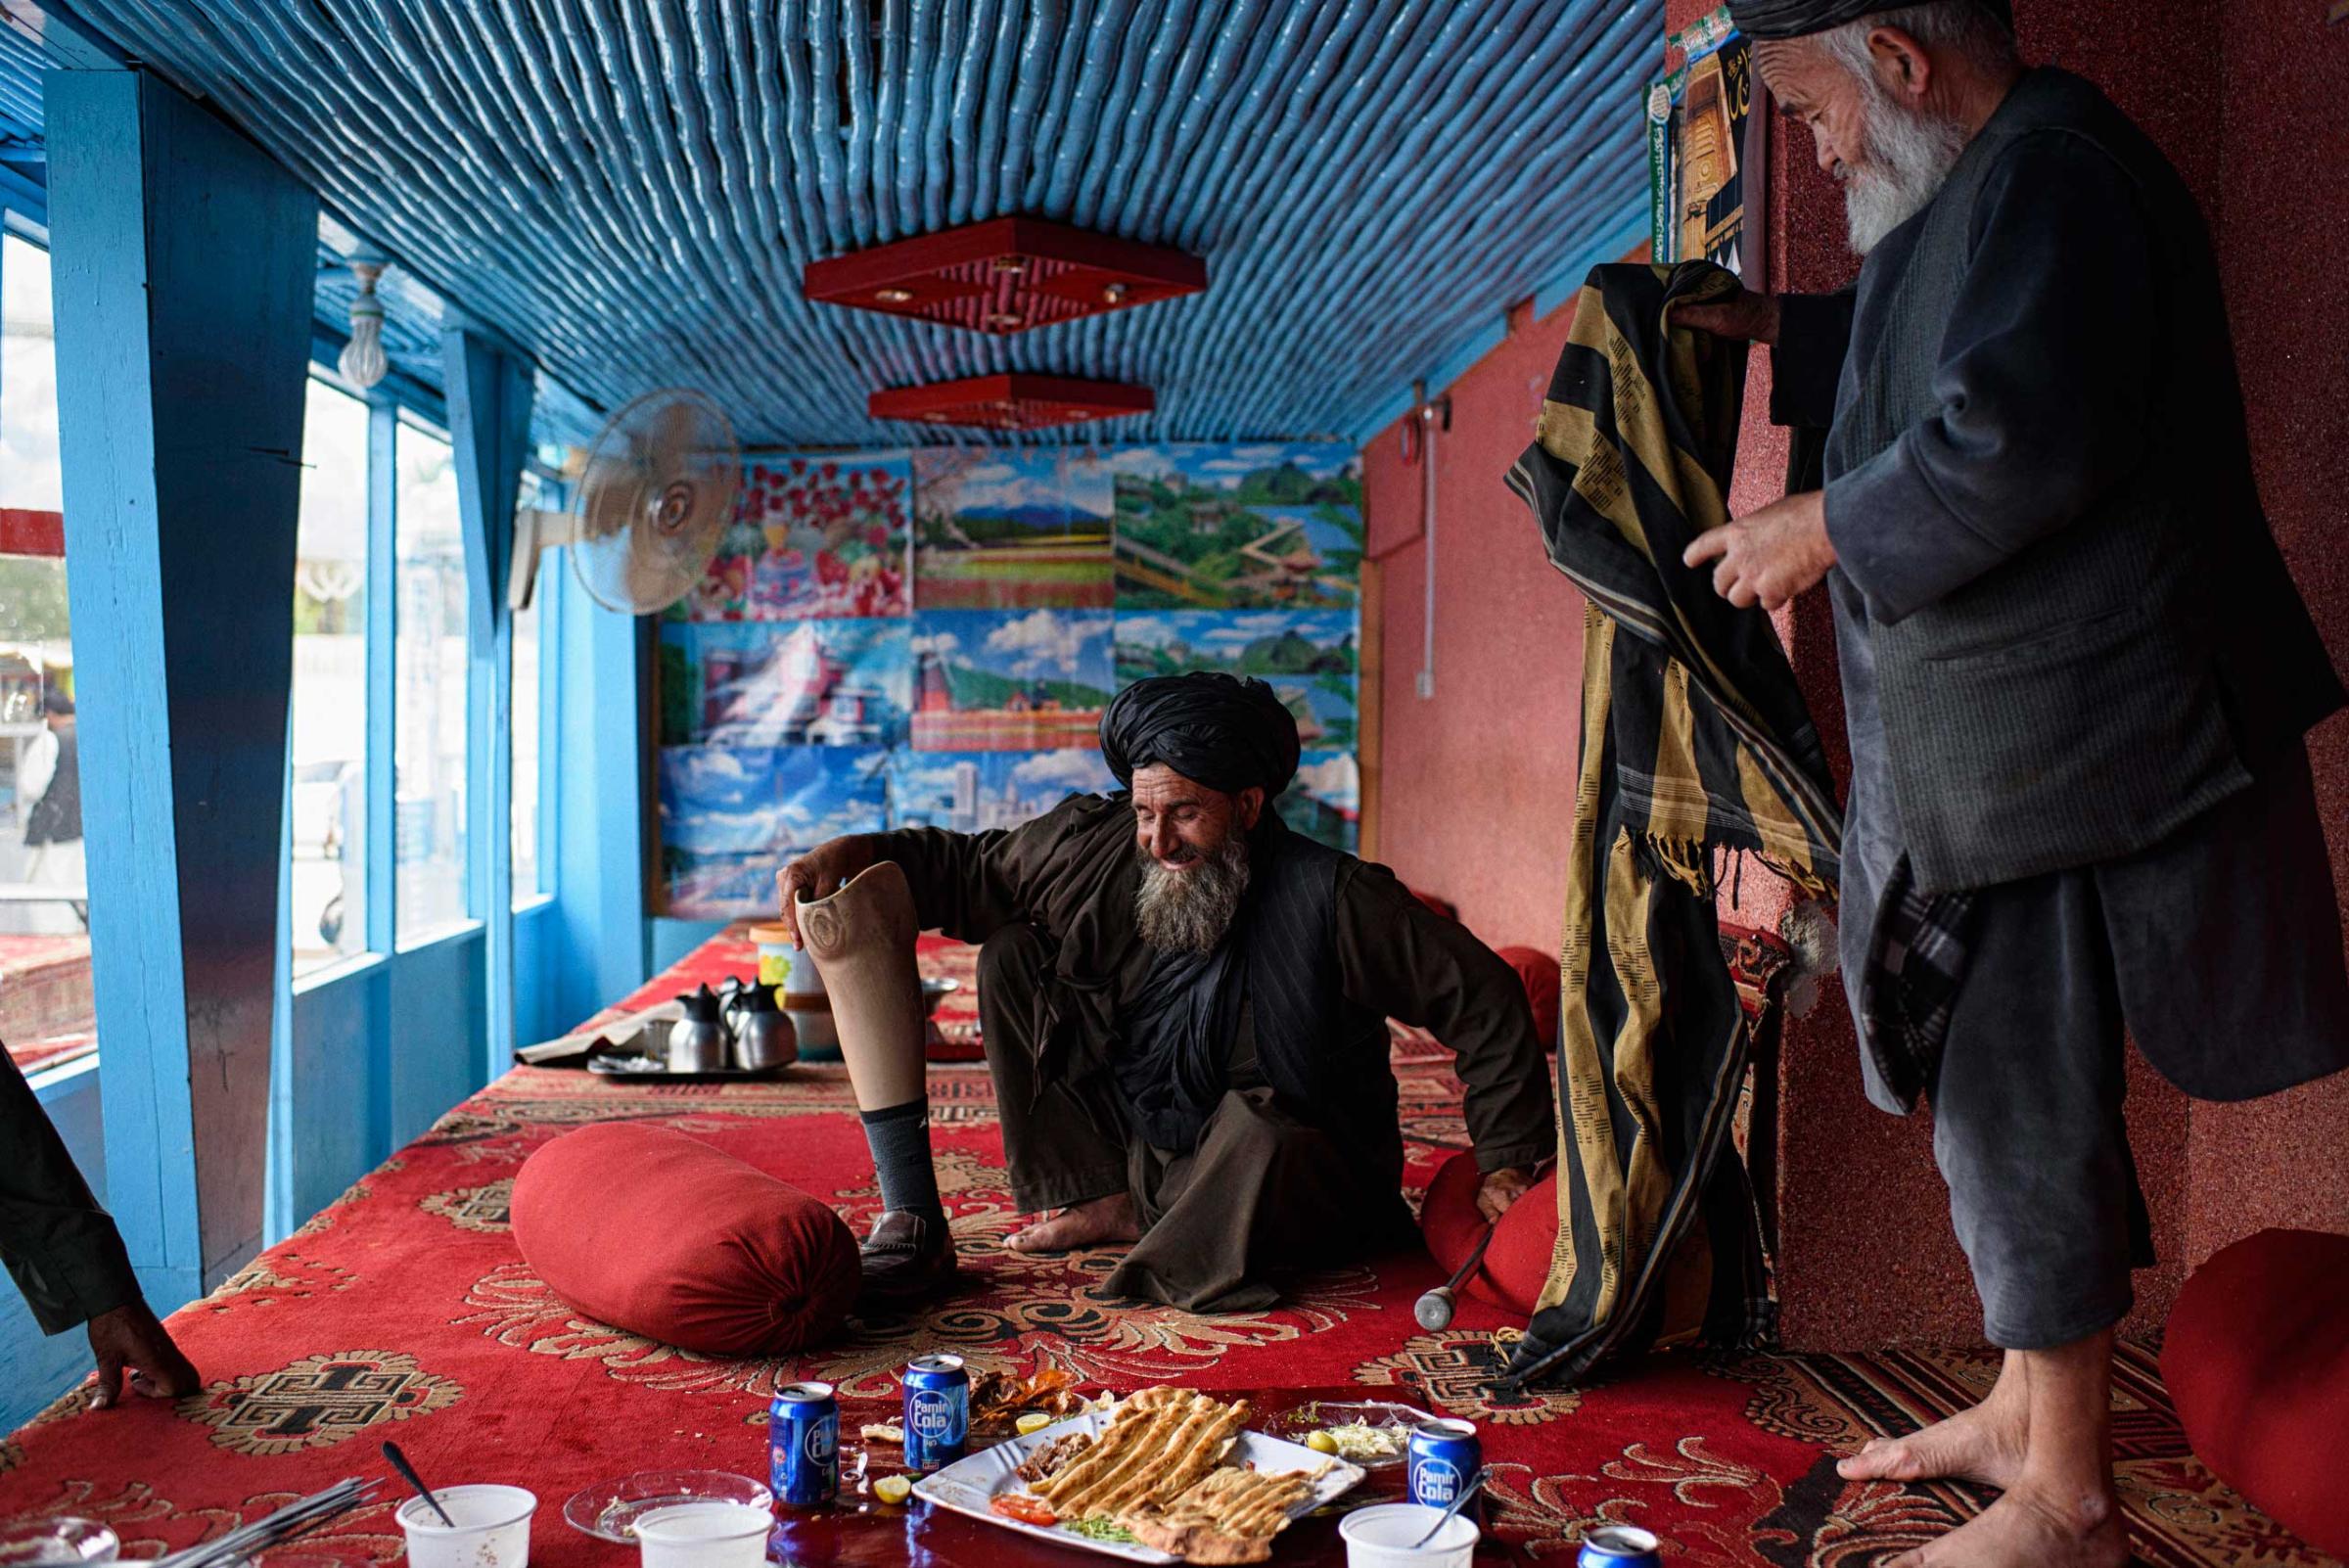 After lunch at a popular restaurant in Lashkar Gah, a guest fits his prosthetic leg before departing with friends.